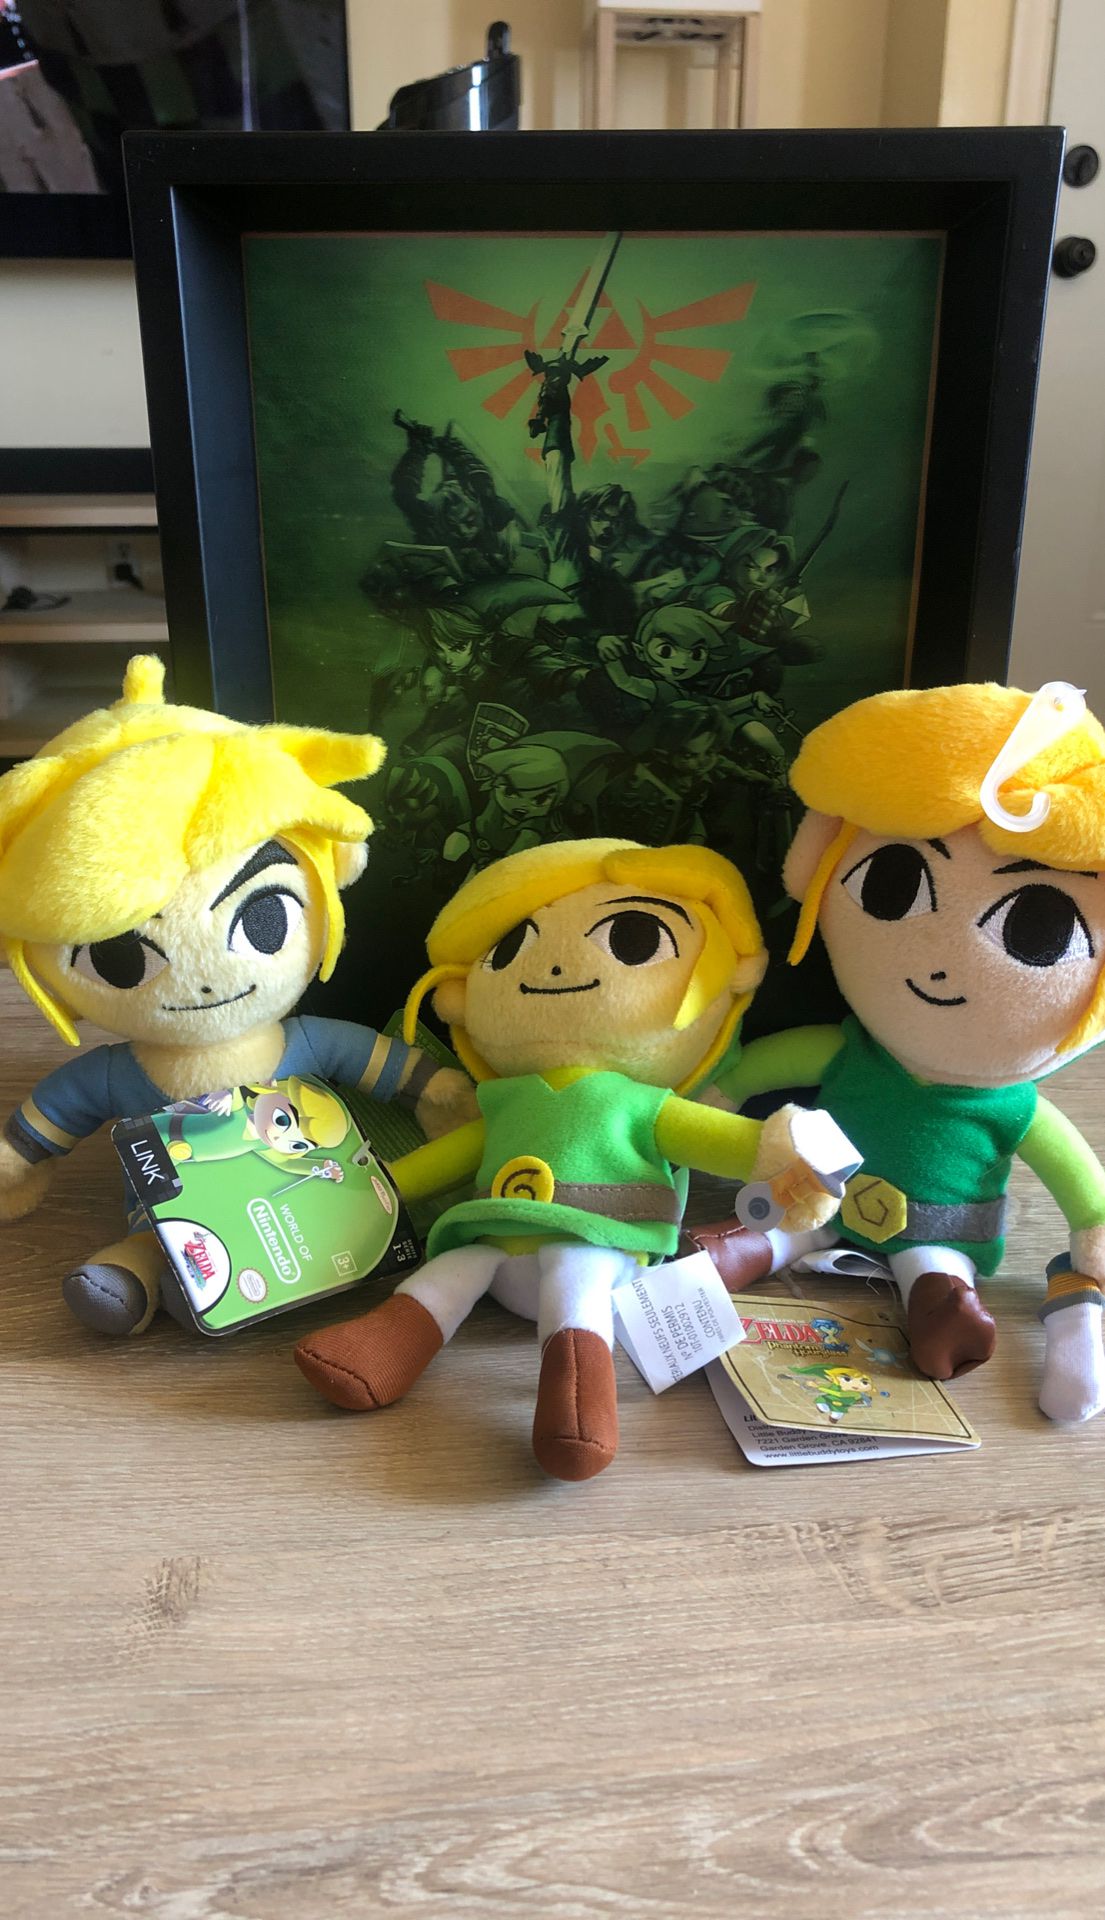 Legend of Zelda plushies with 3D photo frame